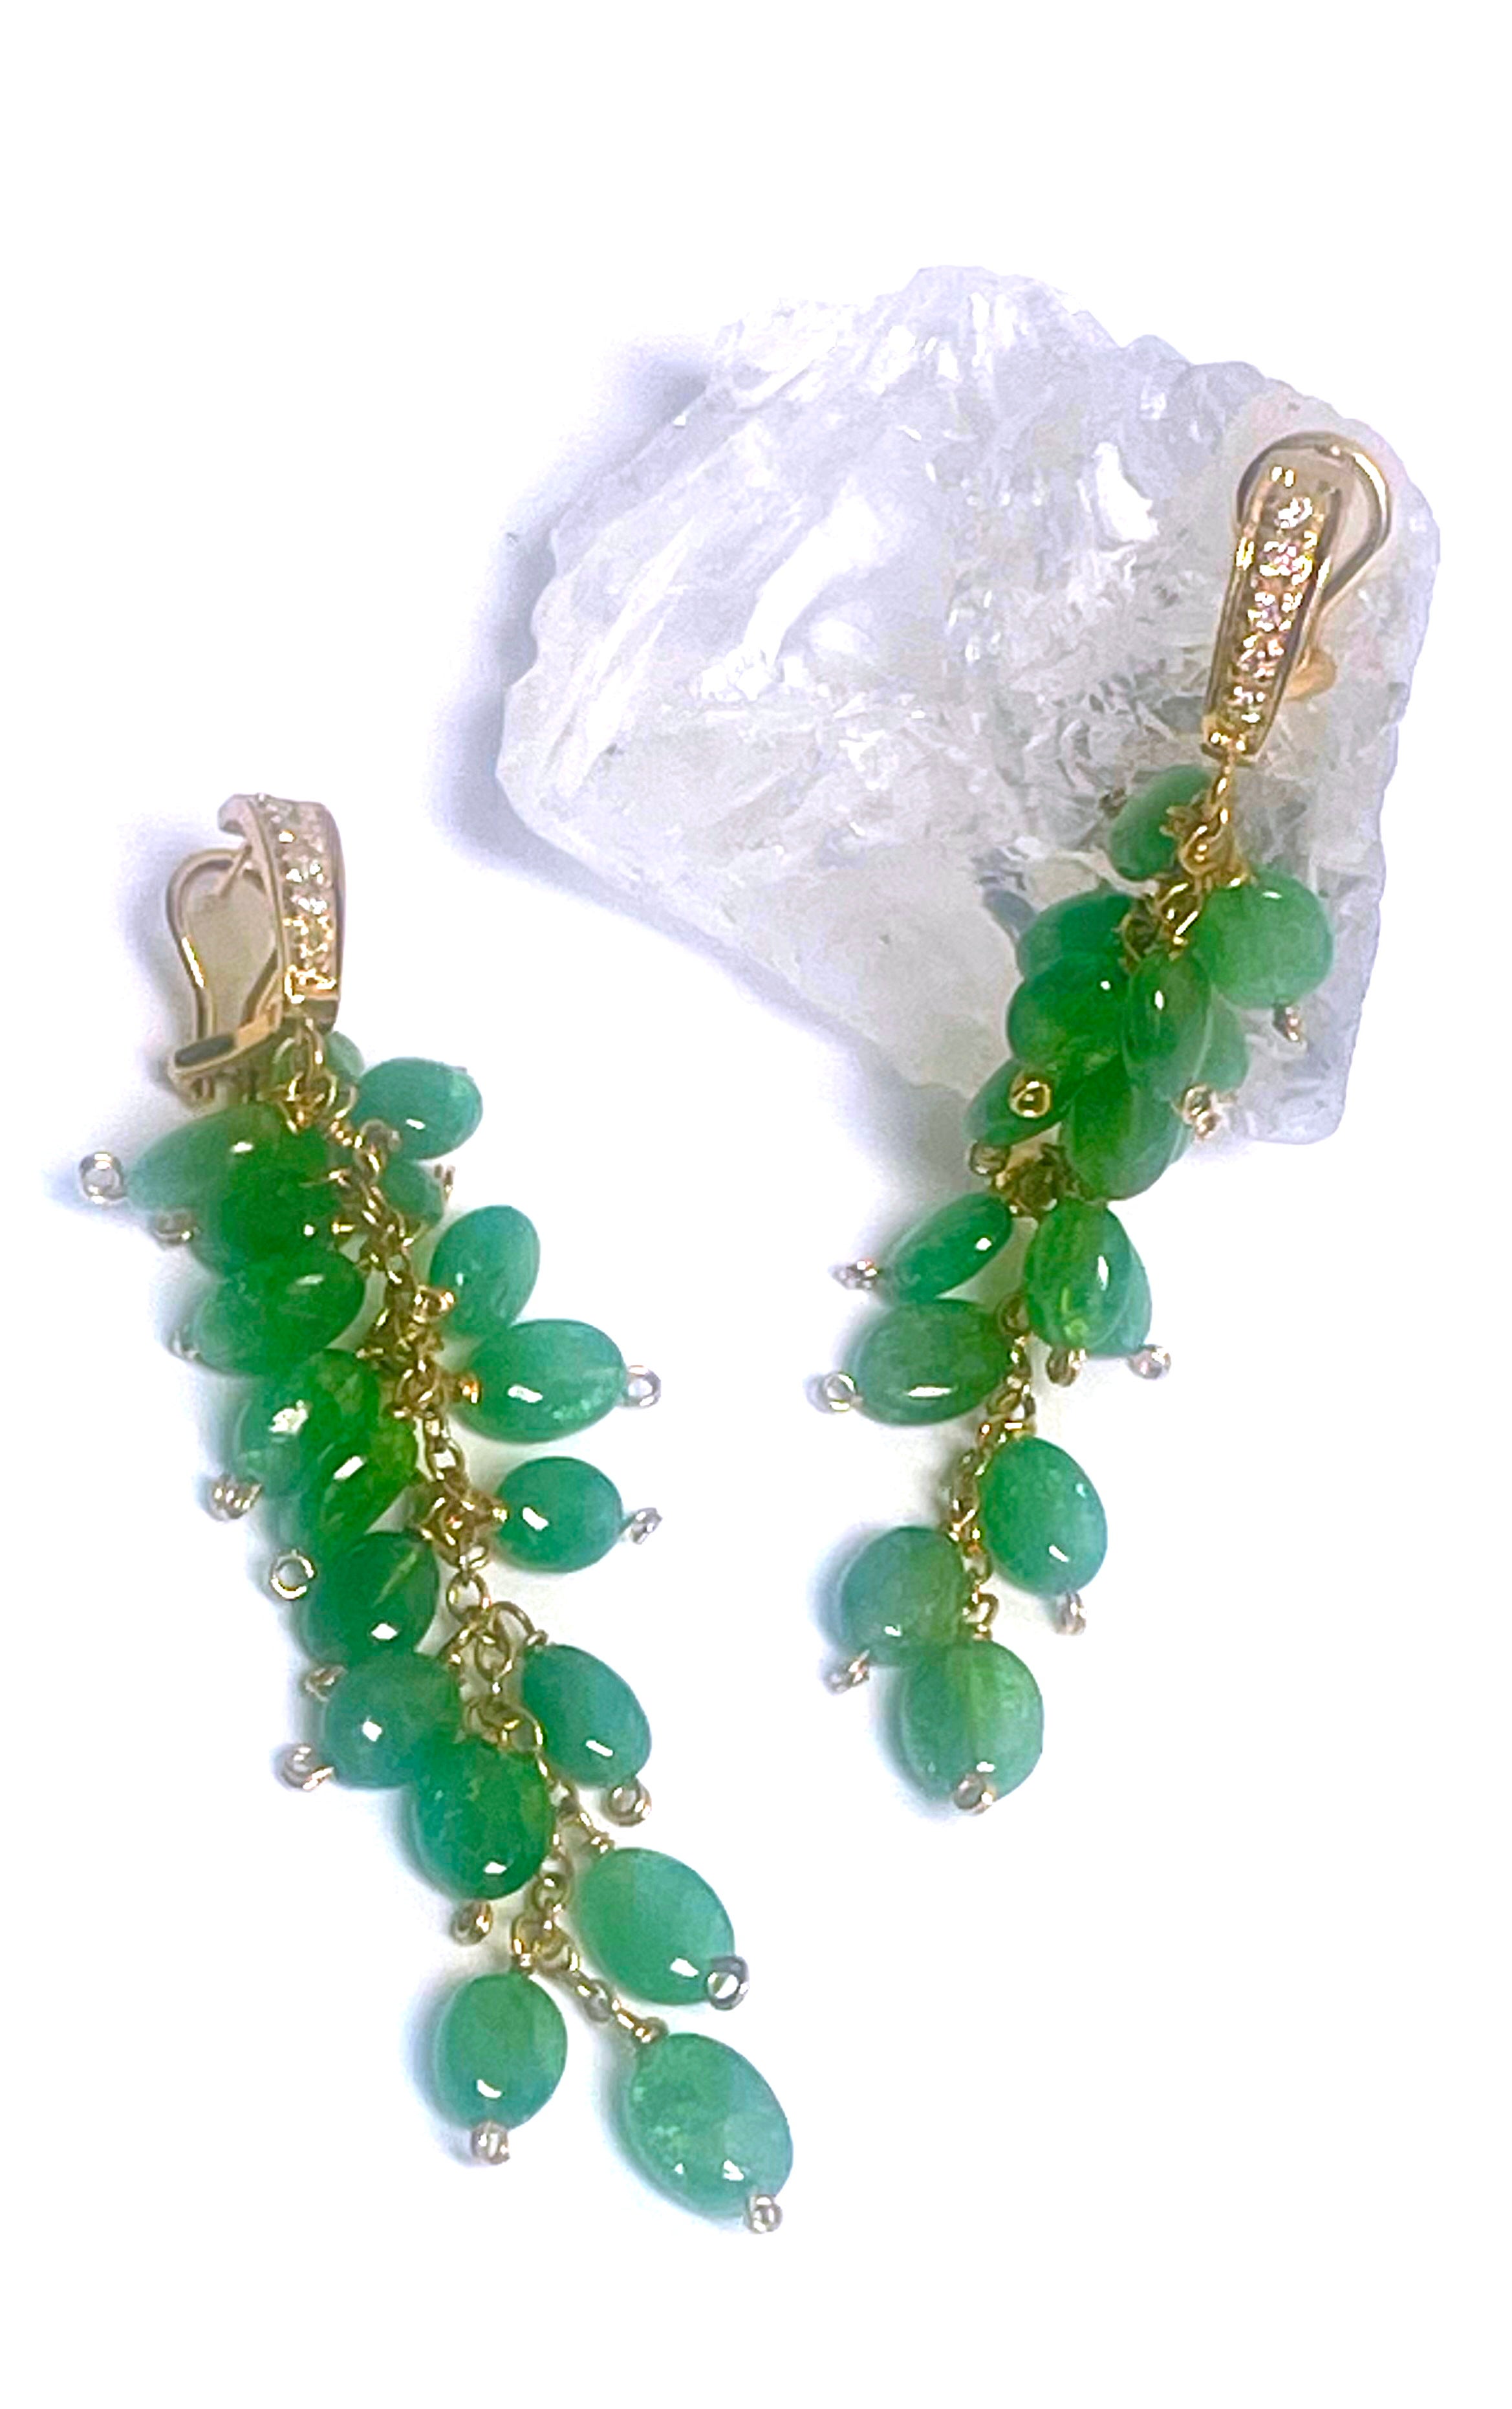 Description
Carefree cascade of Tsavorites, the rarest of Garnets, individually selected, arranged and hand wire-wrapped to dance with delight with your every move as they dangle from 14k yellow gold and diamond posts with easy to use omega